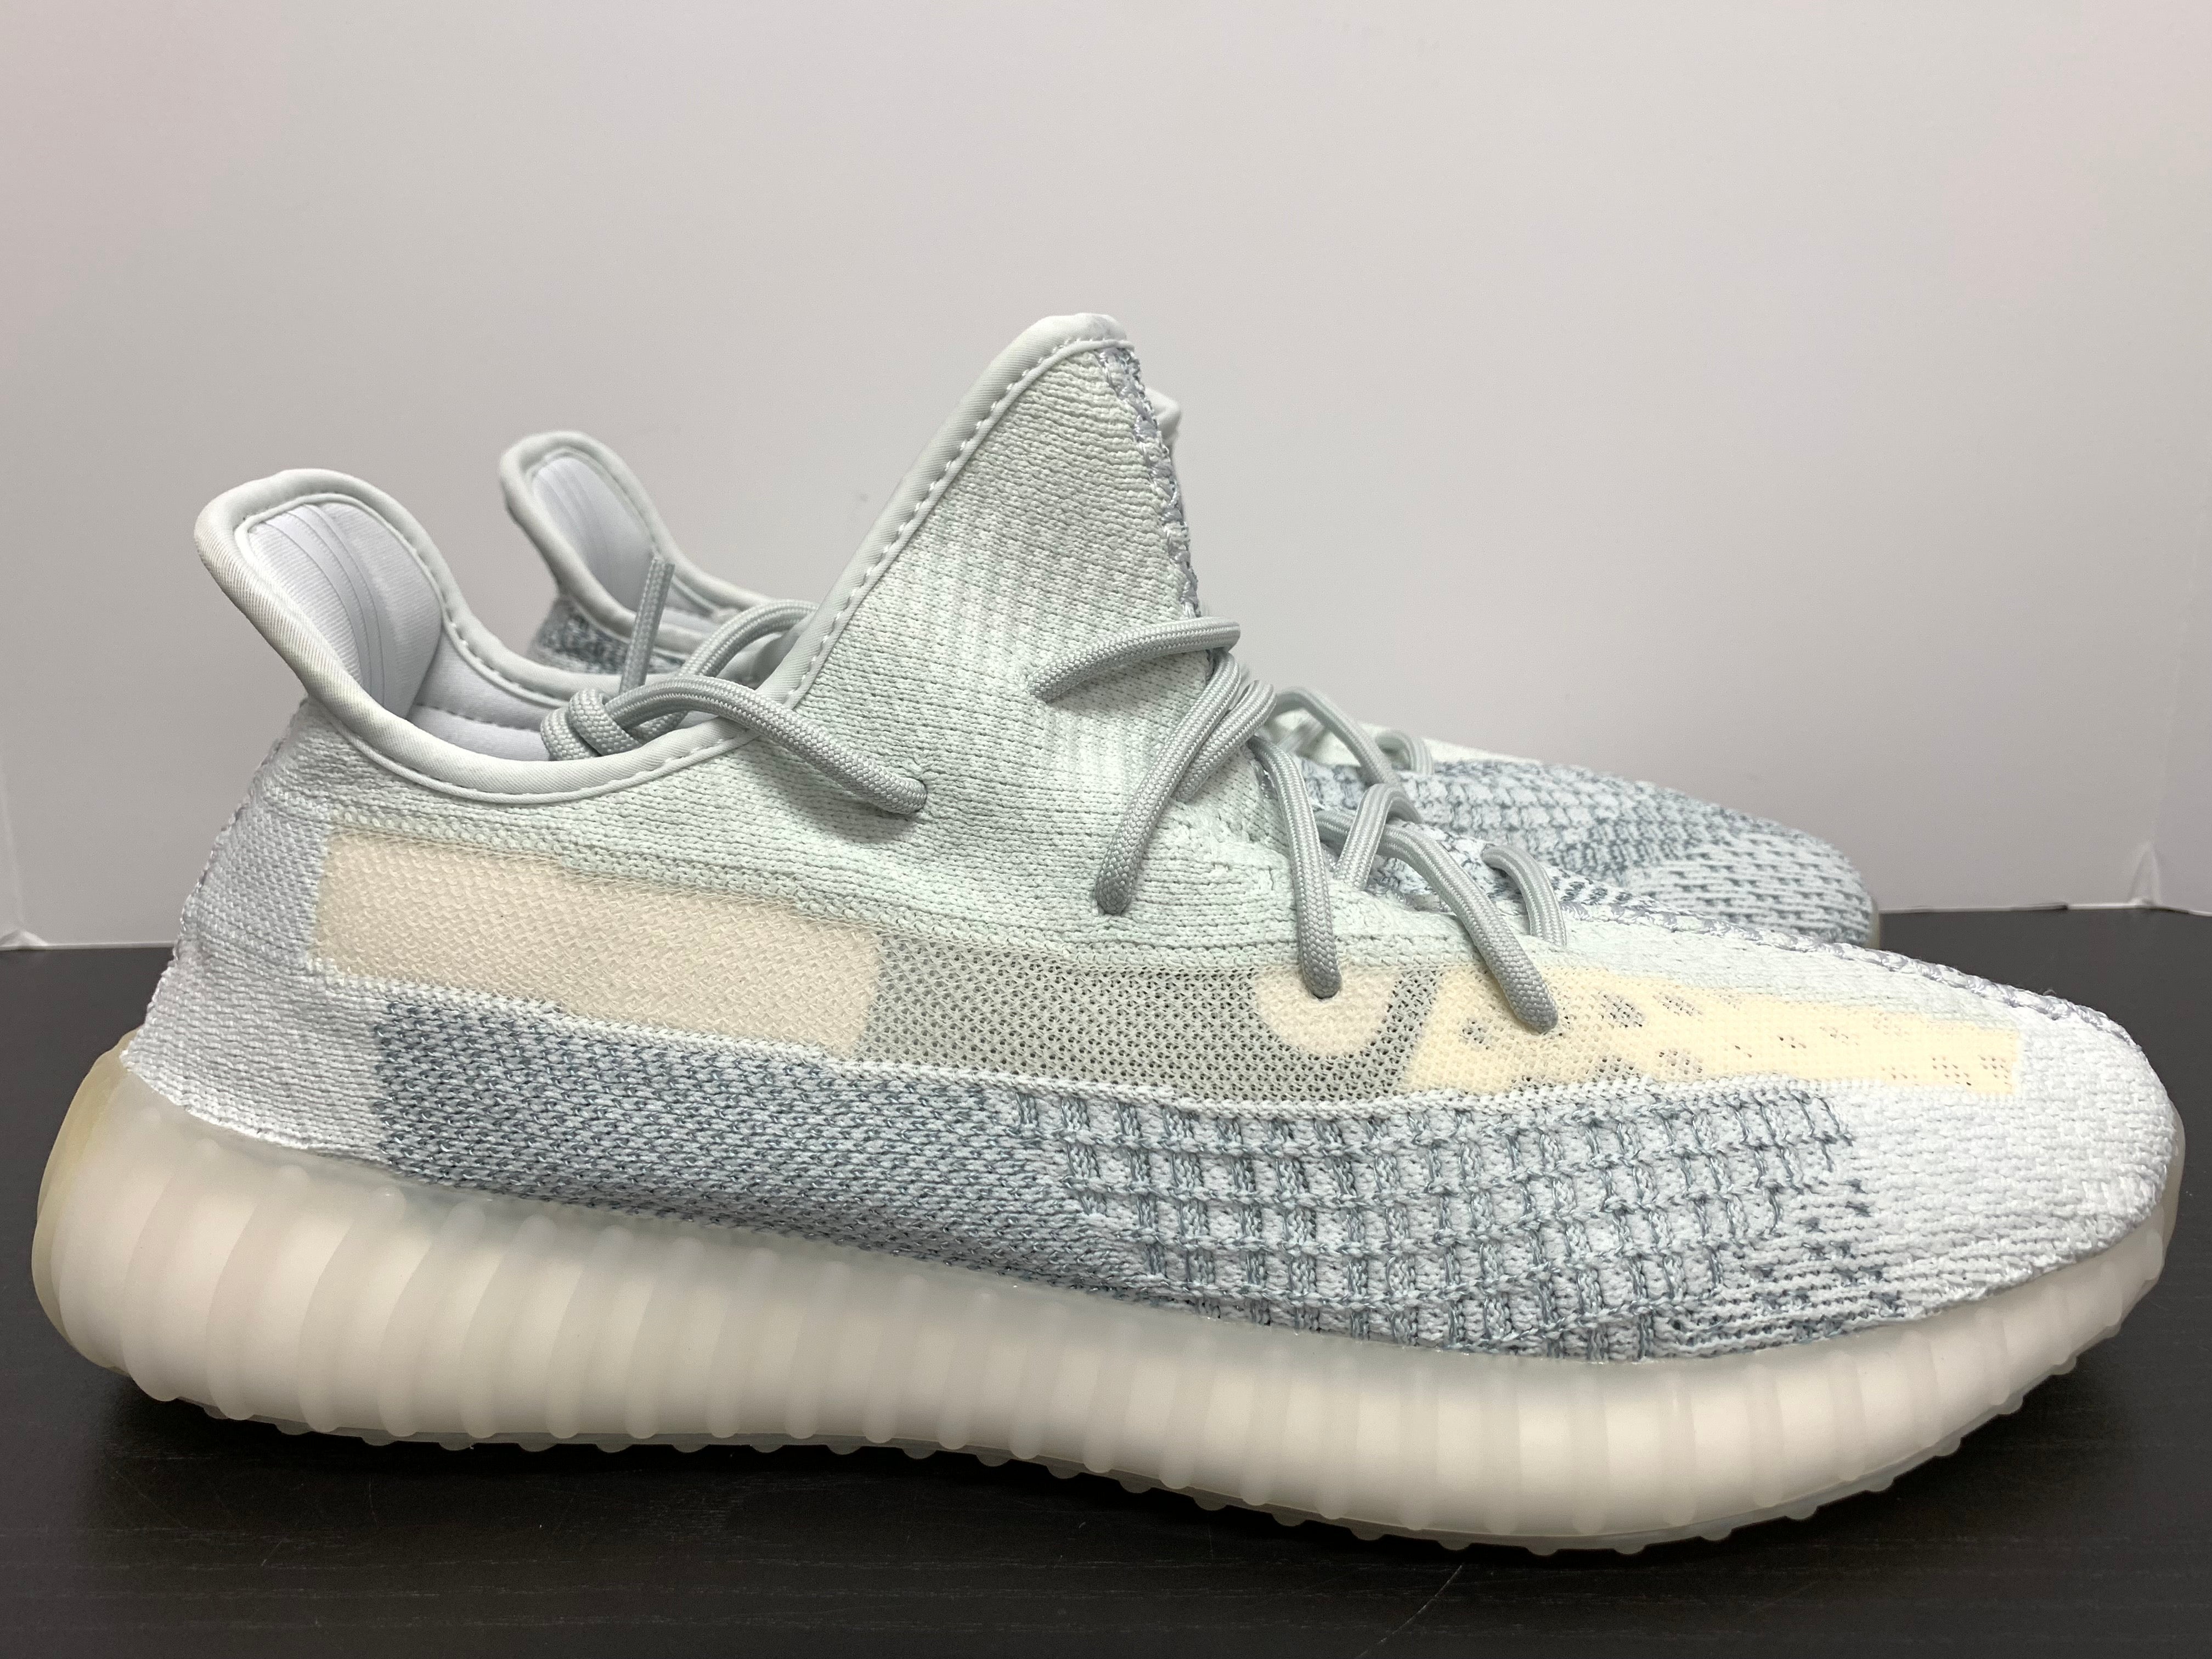 Adidas Yeezy Boost 350 V2 Cloud White Reflective – ChillyKicks